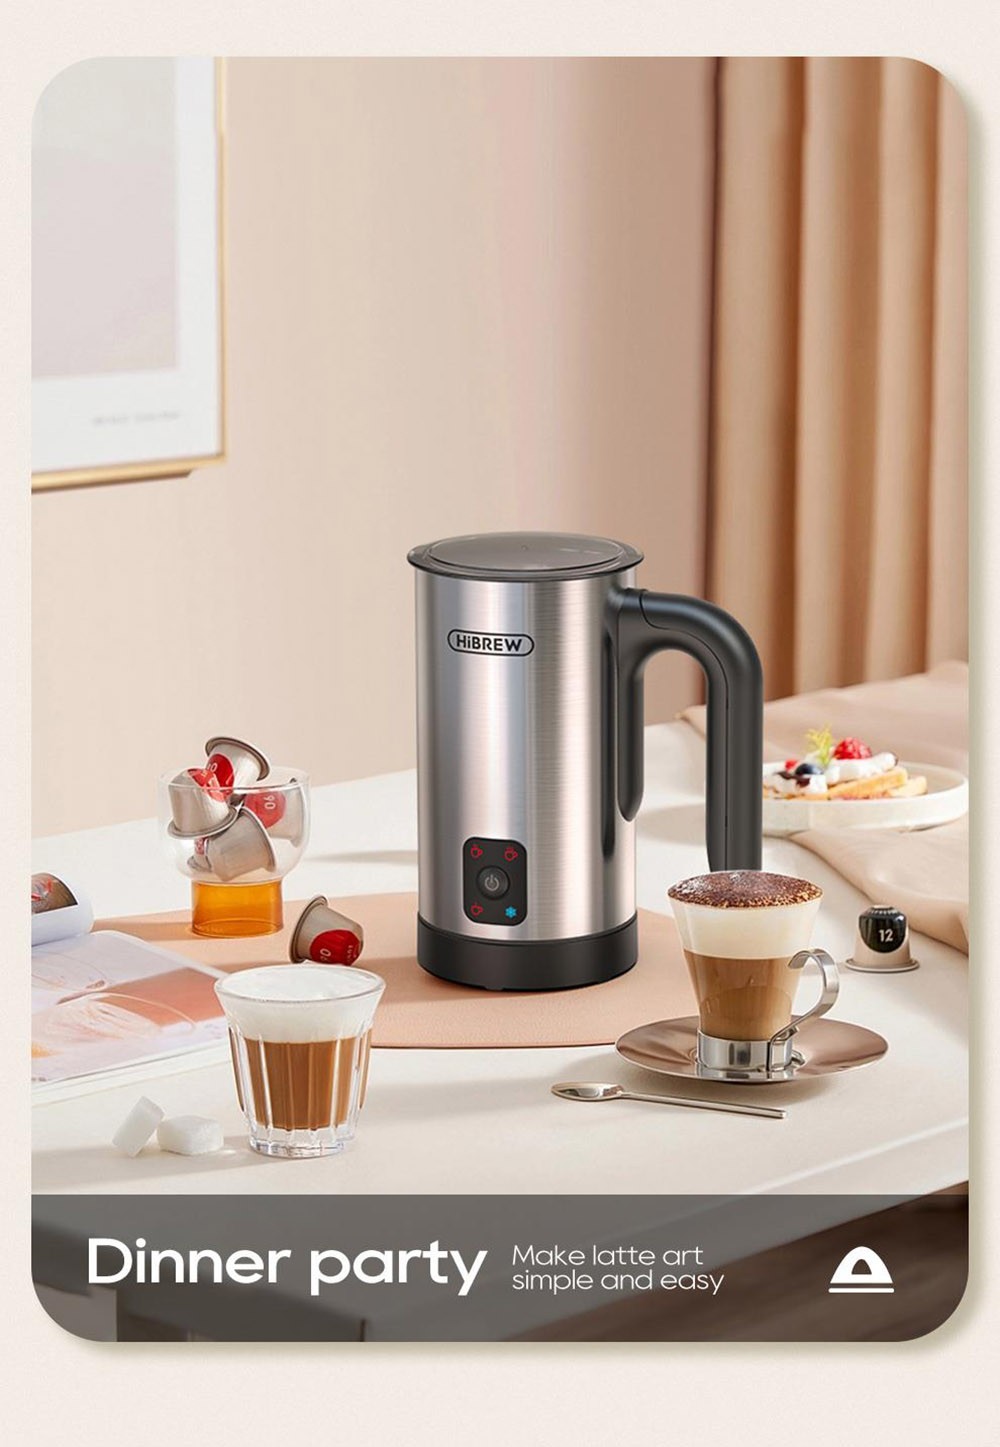 HiBREW M3A 4 in 1 Milk Frother Foamer, Fully Automatic Milk Warmer, Cold/Hot Frothing, 130ml Frothing Capacity